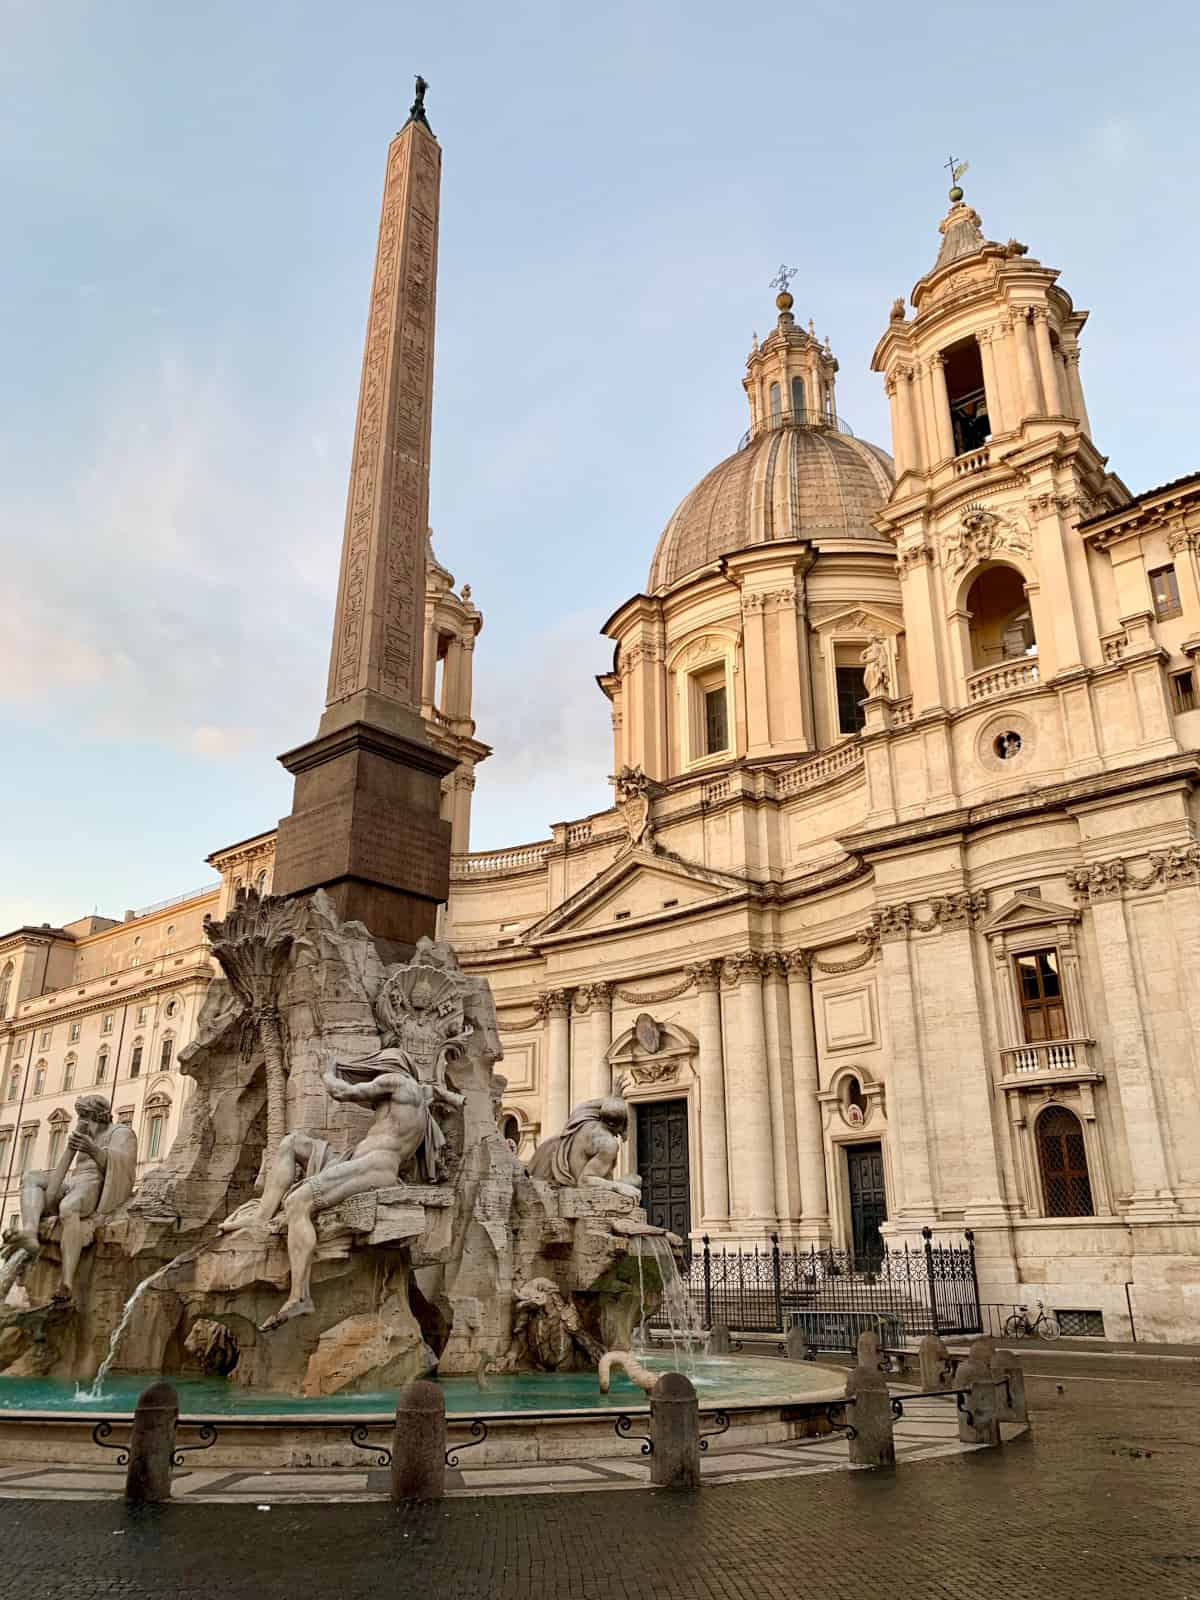 best photo spots in rome,rome photography tips